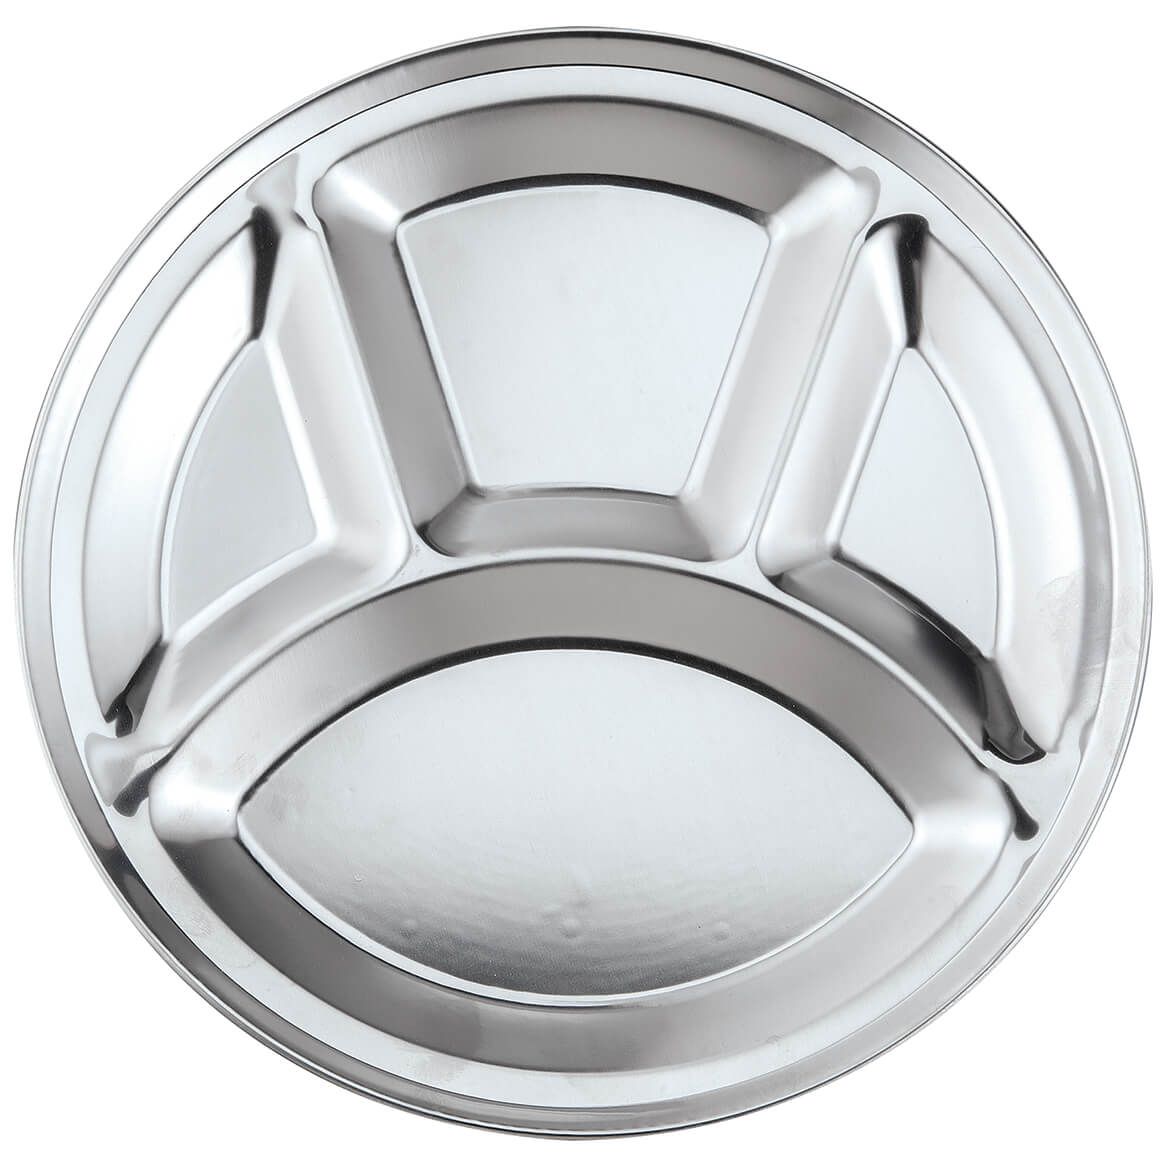 Stainless Steel Round Divided Dinner Plate + '-' + 374496